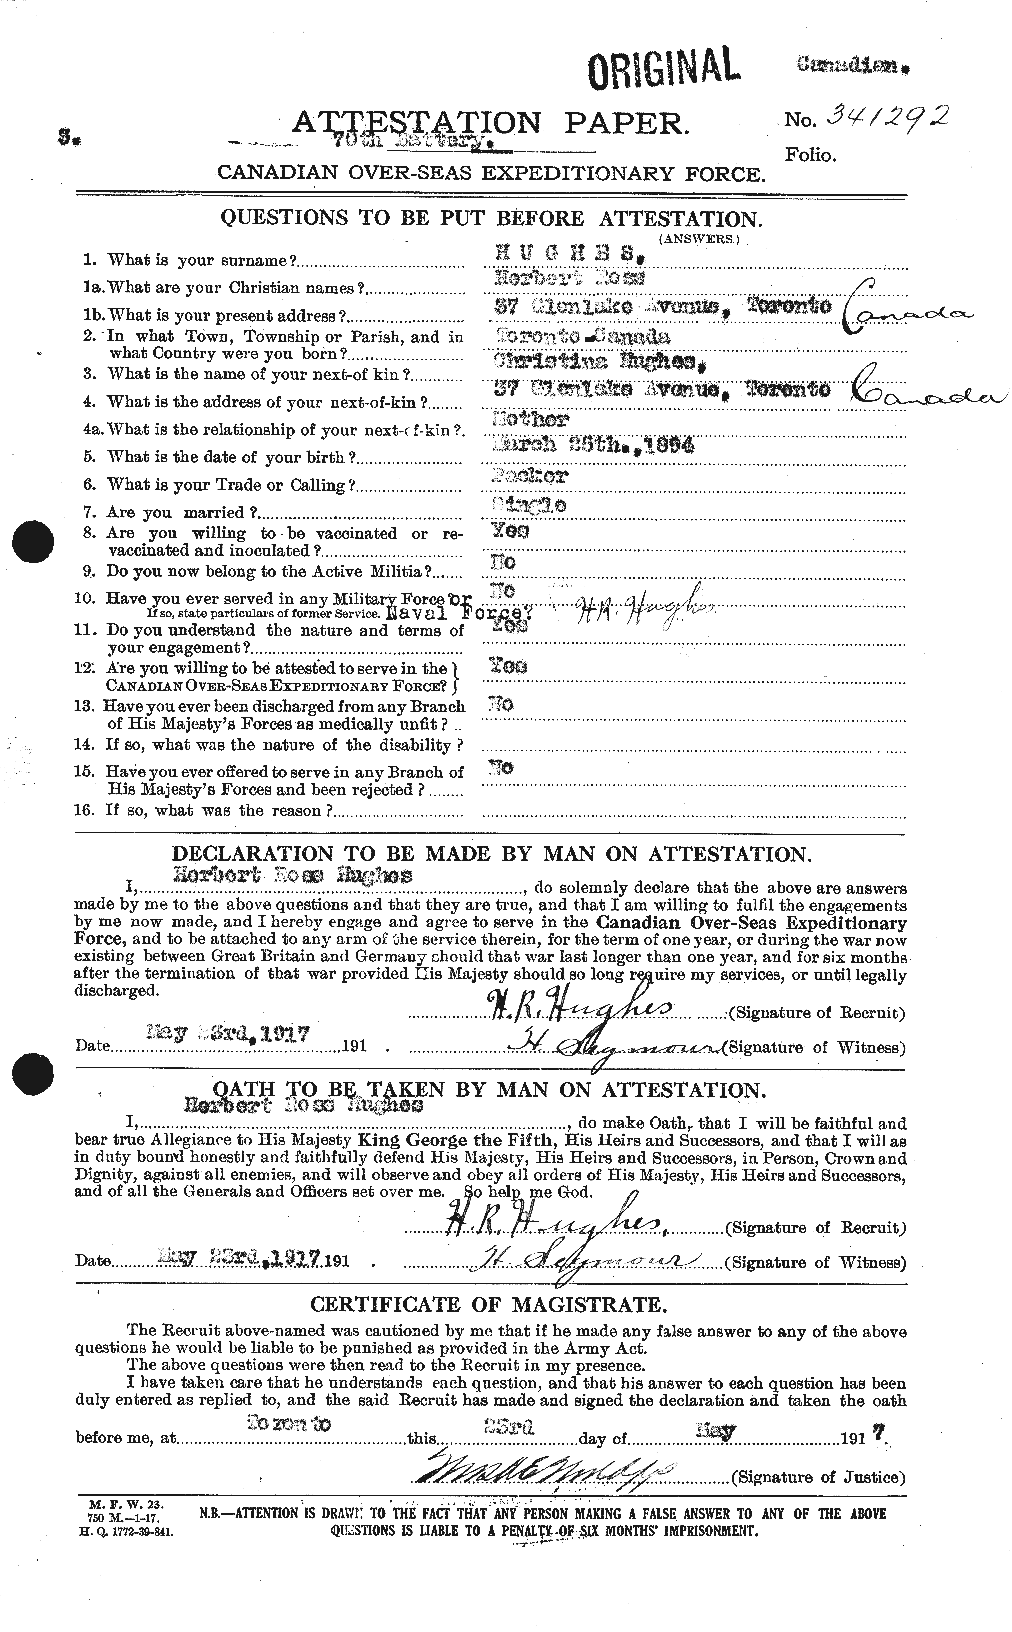 Personnel Records of the First World War - CEF 403903a